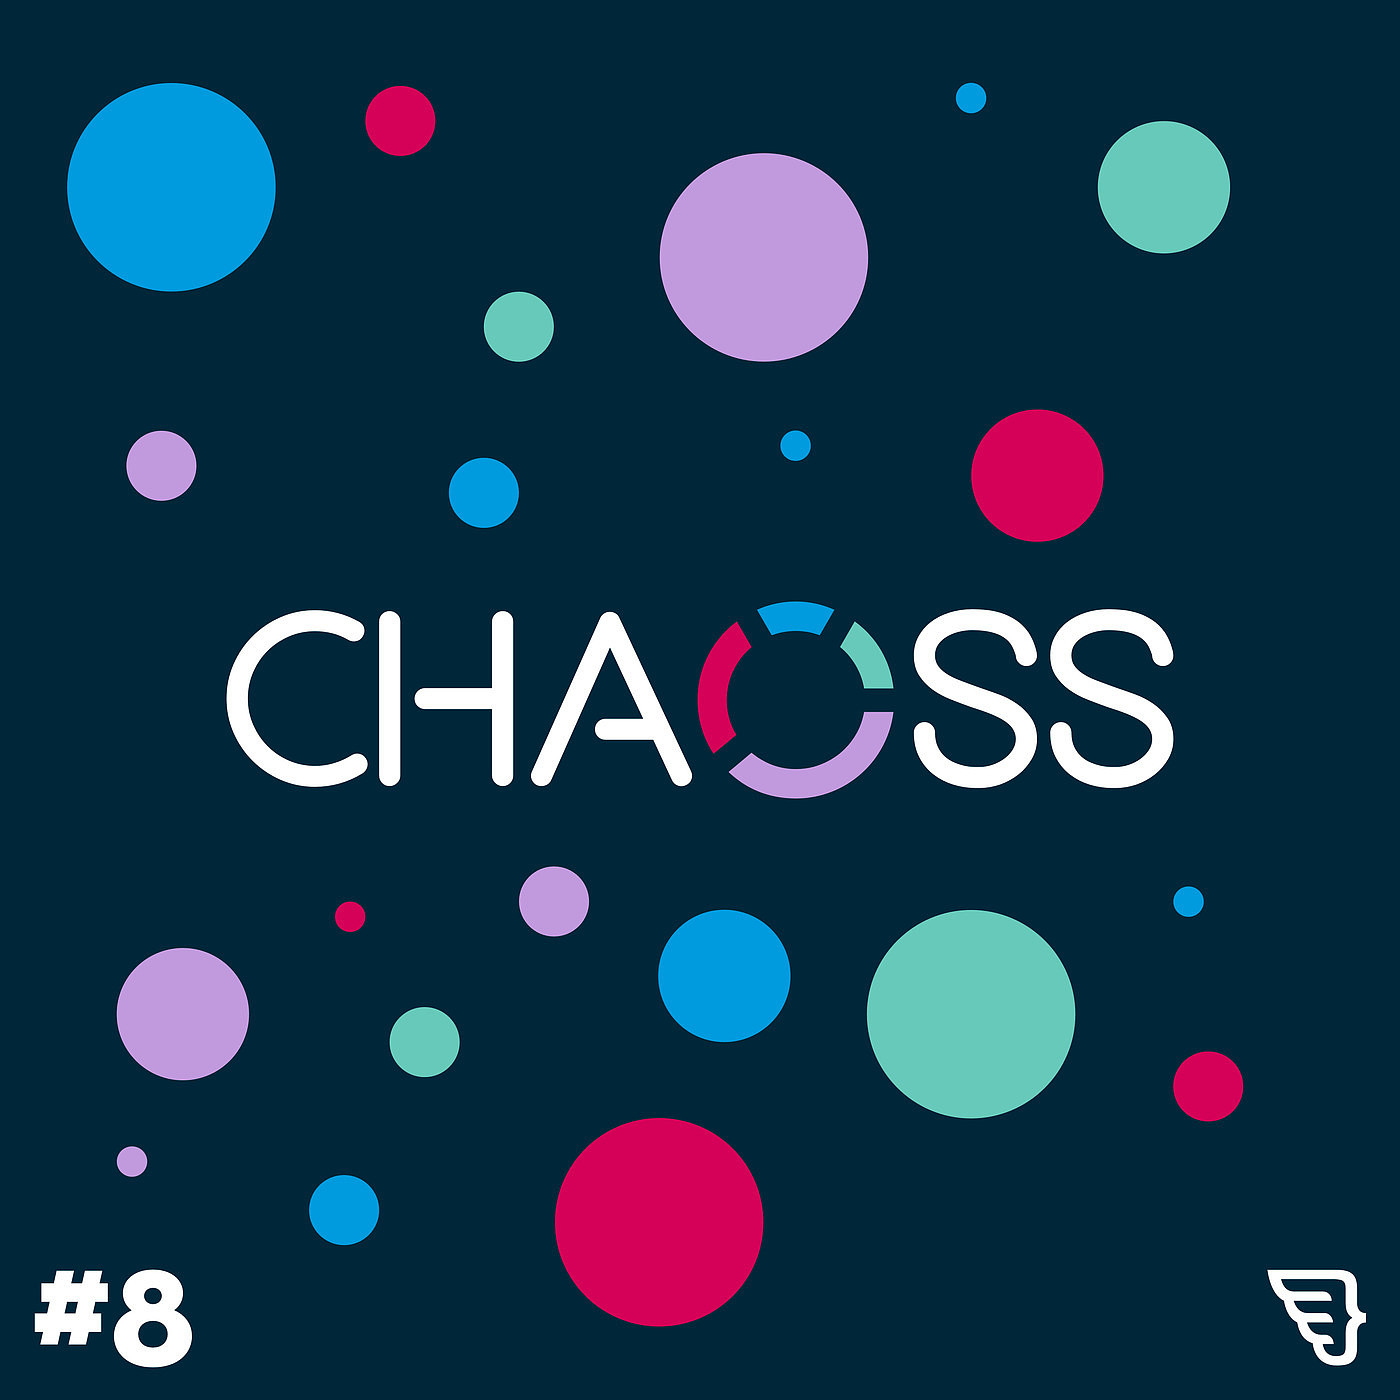 ChaossCast Podcast - Mautic Community with Ruth Cheesley